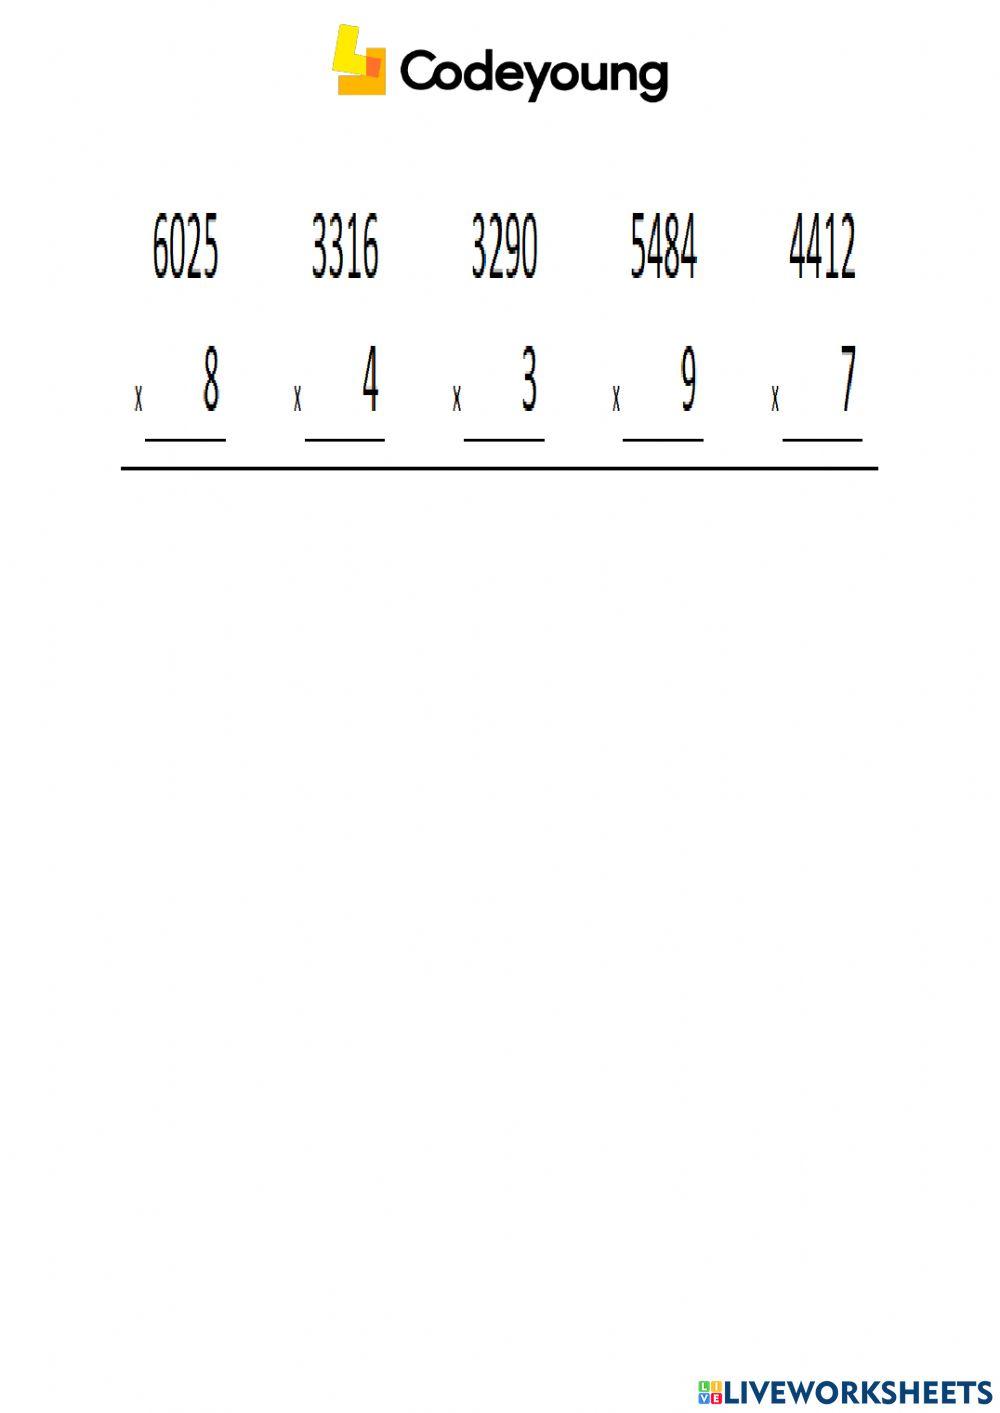 Properties of Arithmetic Operations concept cw